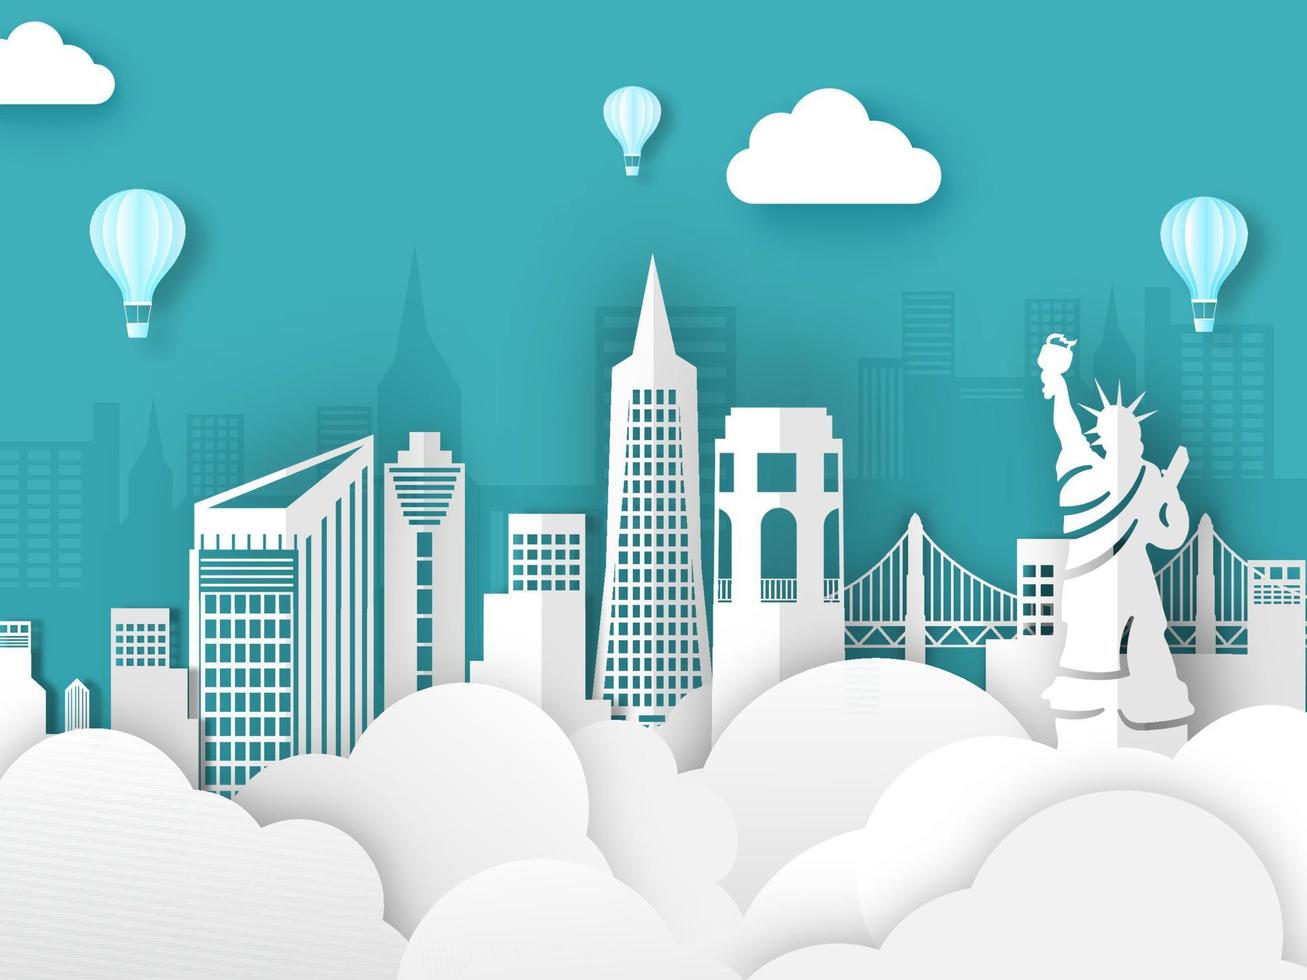 Paper Craft Skyscraper Building with Famous Monuments, Bridge and Hot Air Balloons on Clouds Background. vector